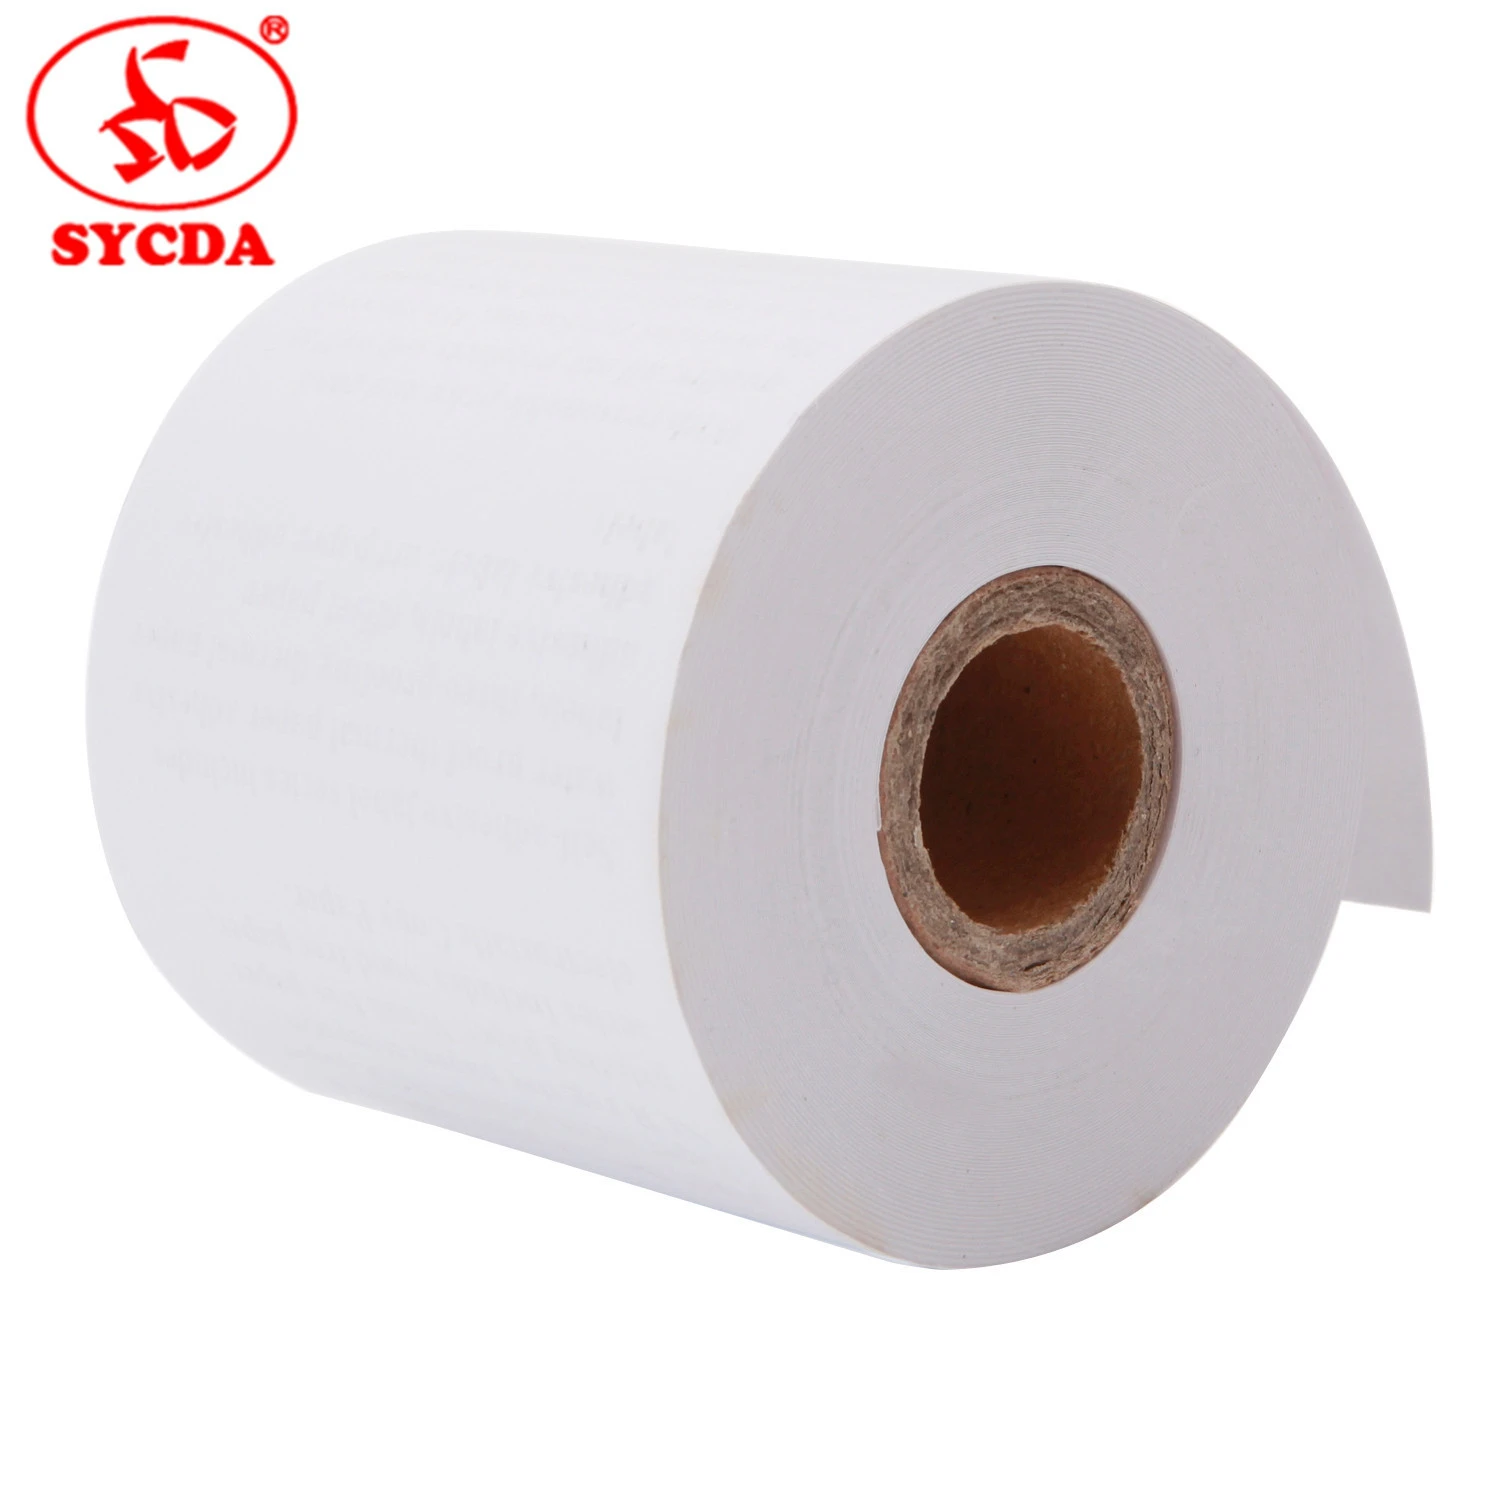 Thermal paper for printing on tishirt